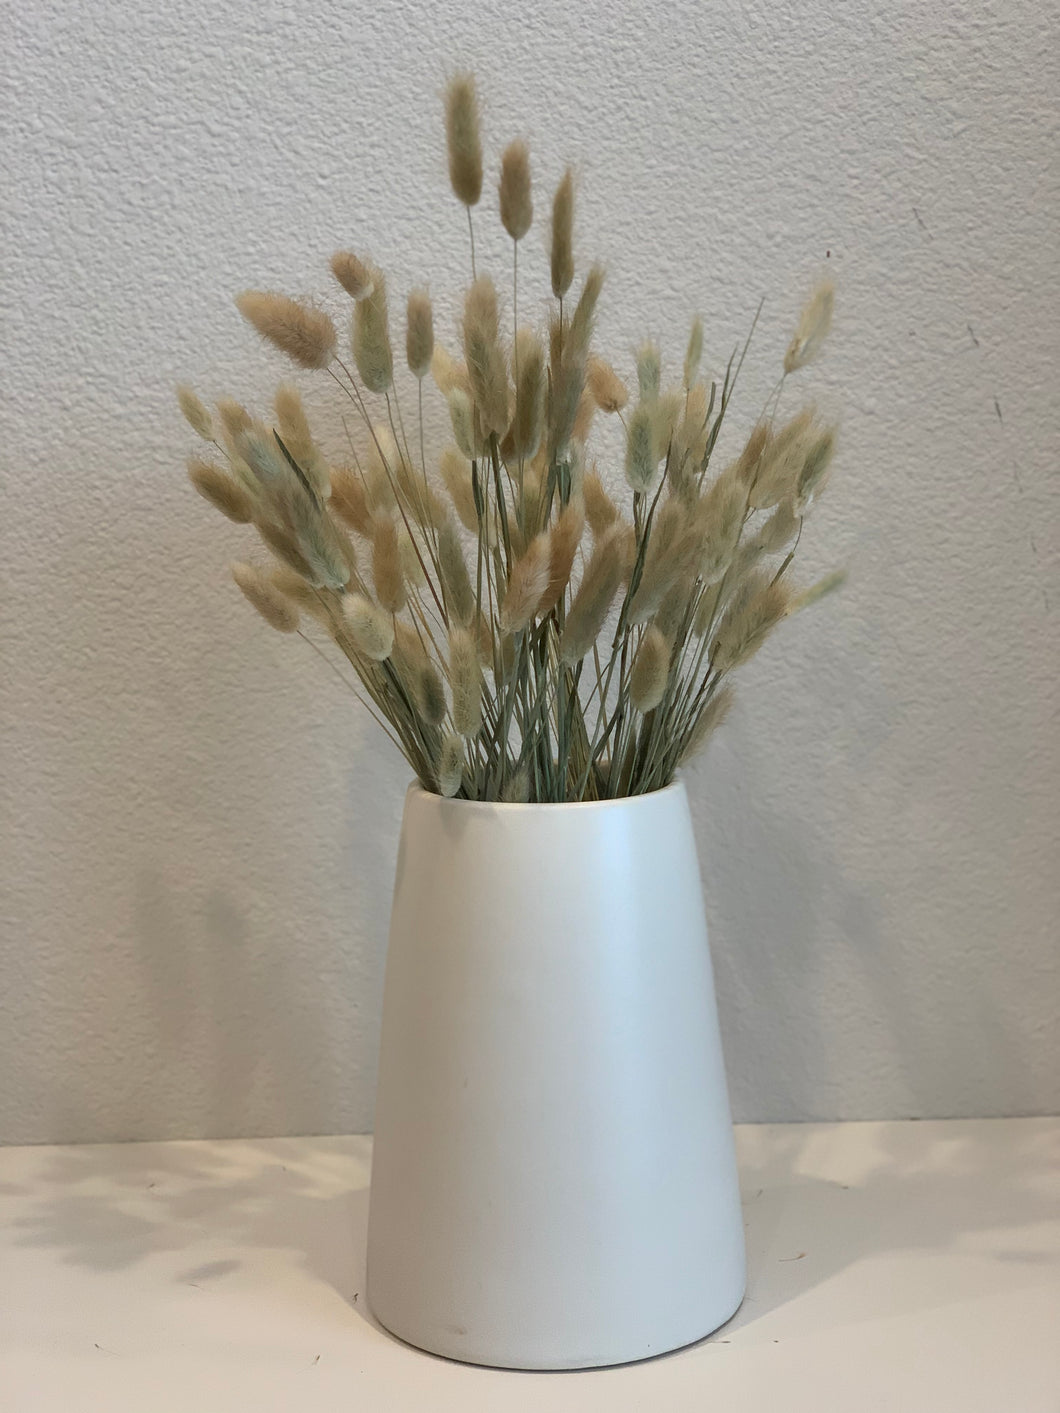 Dried bunny tail bunch- approx. 60 stems